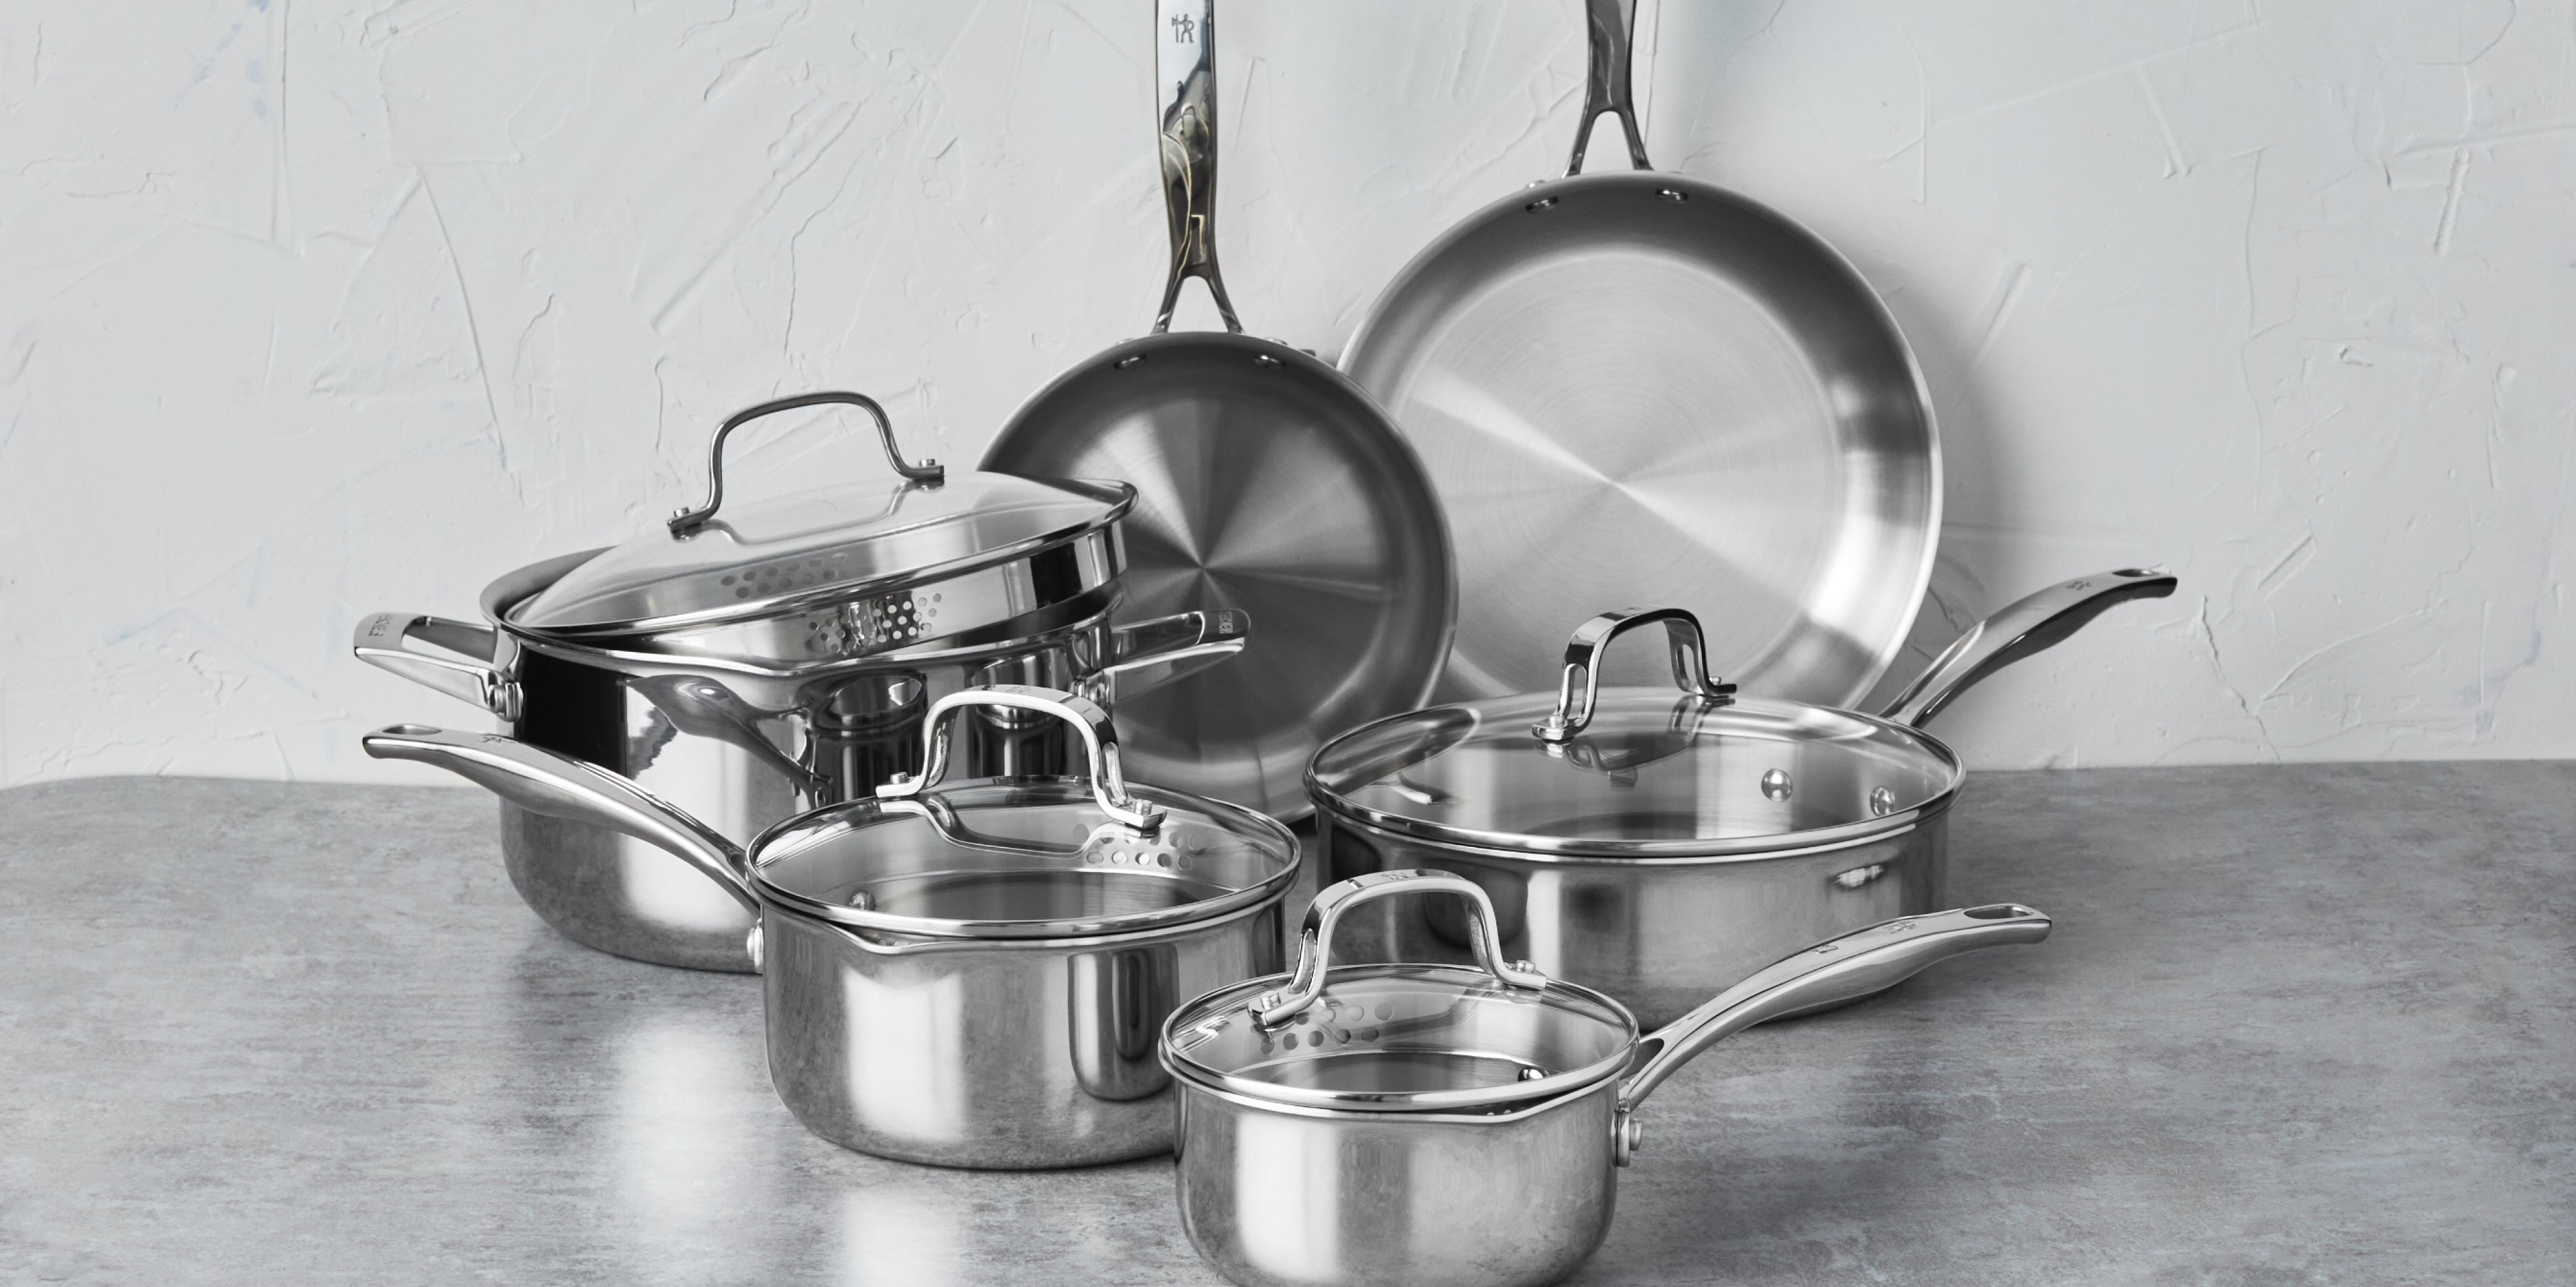 Henckels Clad Alliance 10-pc. Stainless Steel Cookware Set, Color